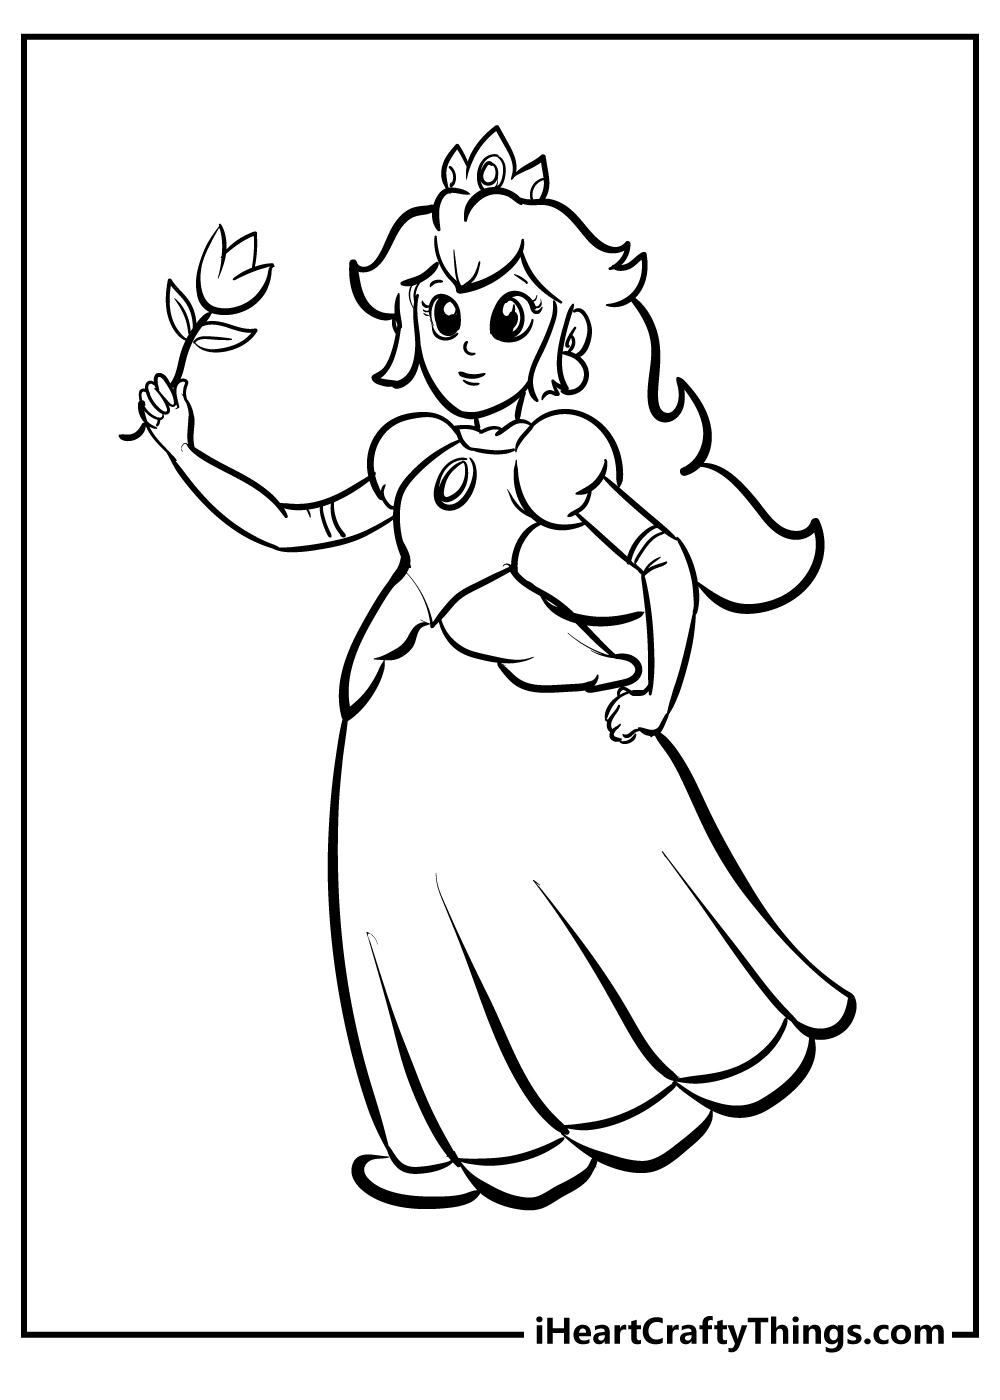 Princess peach coloring pages free printables